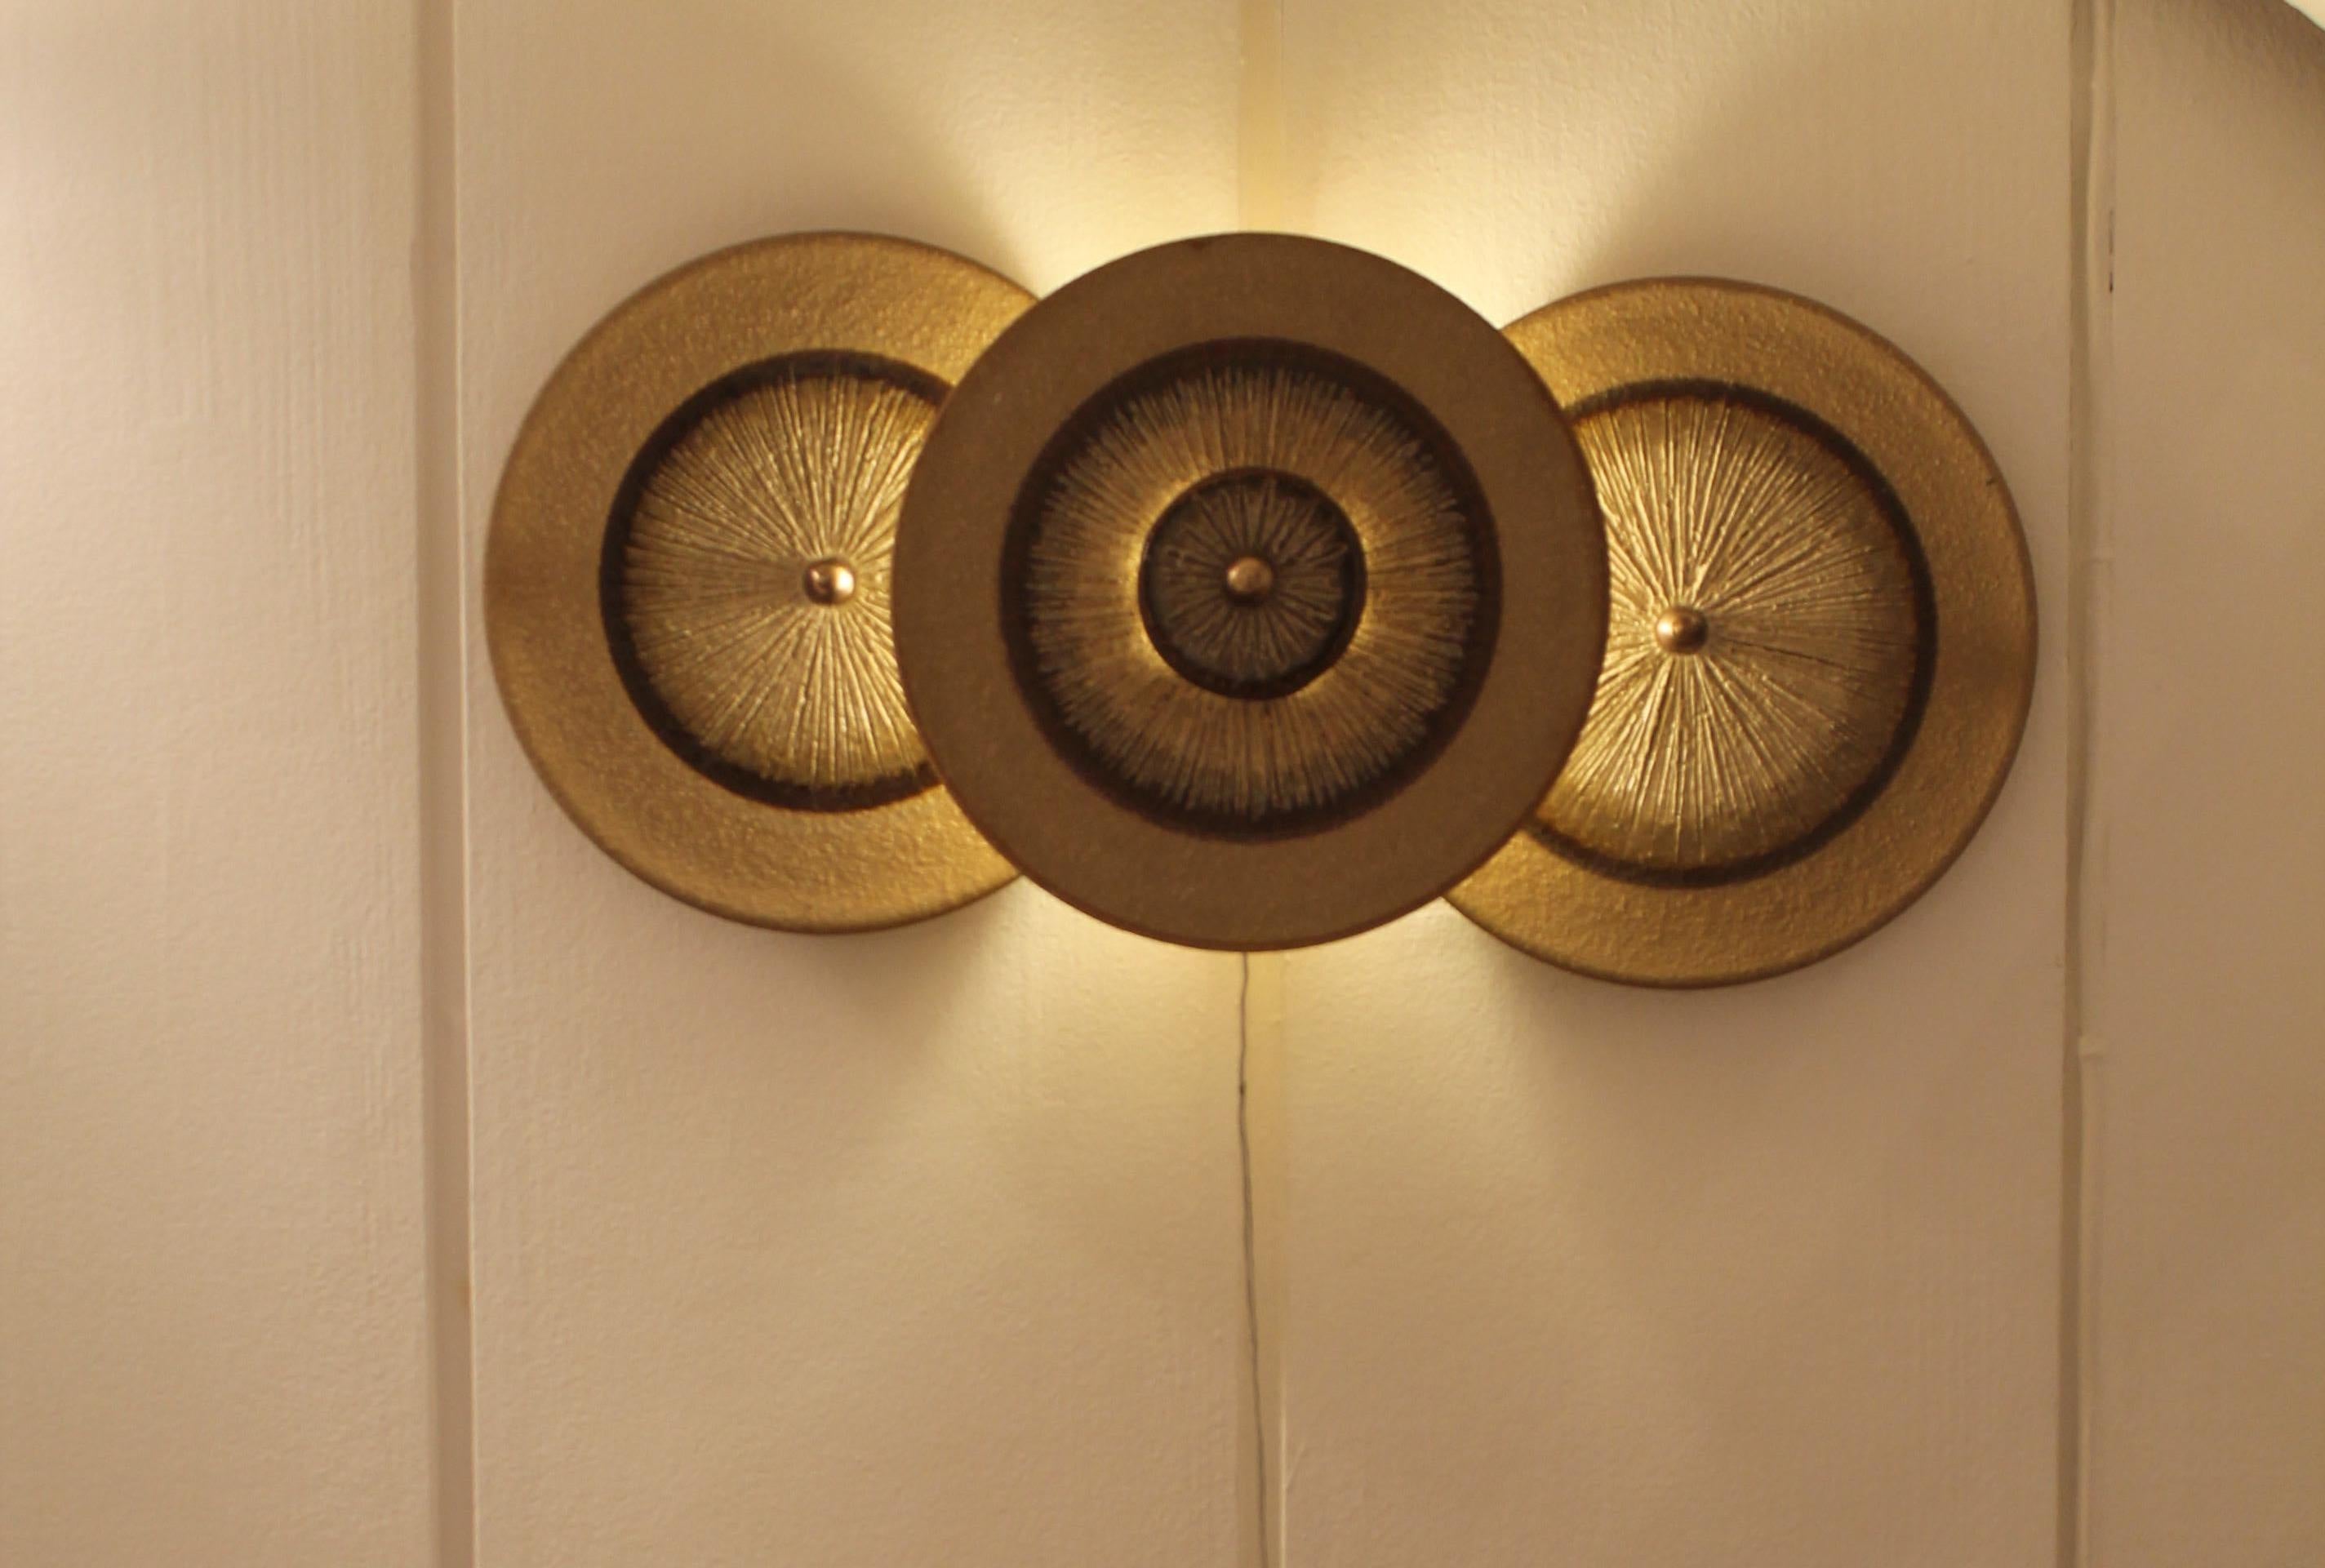 Edition Soholm
Painted ceramic wall lamp with 3 discs
Denmark 1970
Length: 55cm
Width: 24 cm
Height: 8 cm